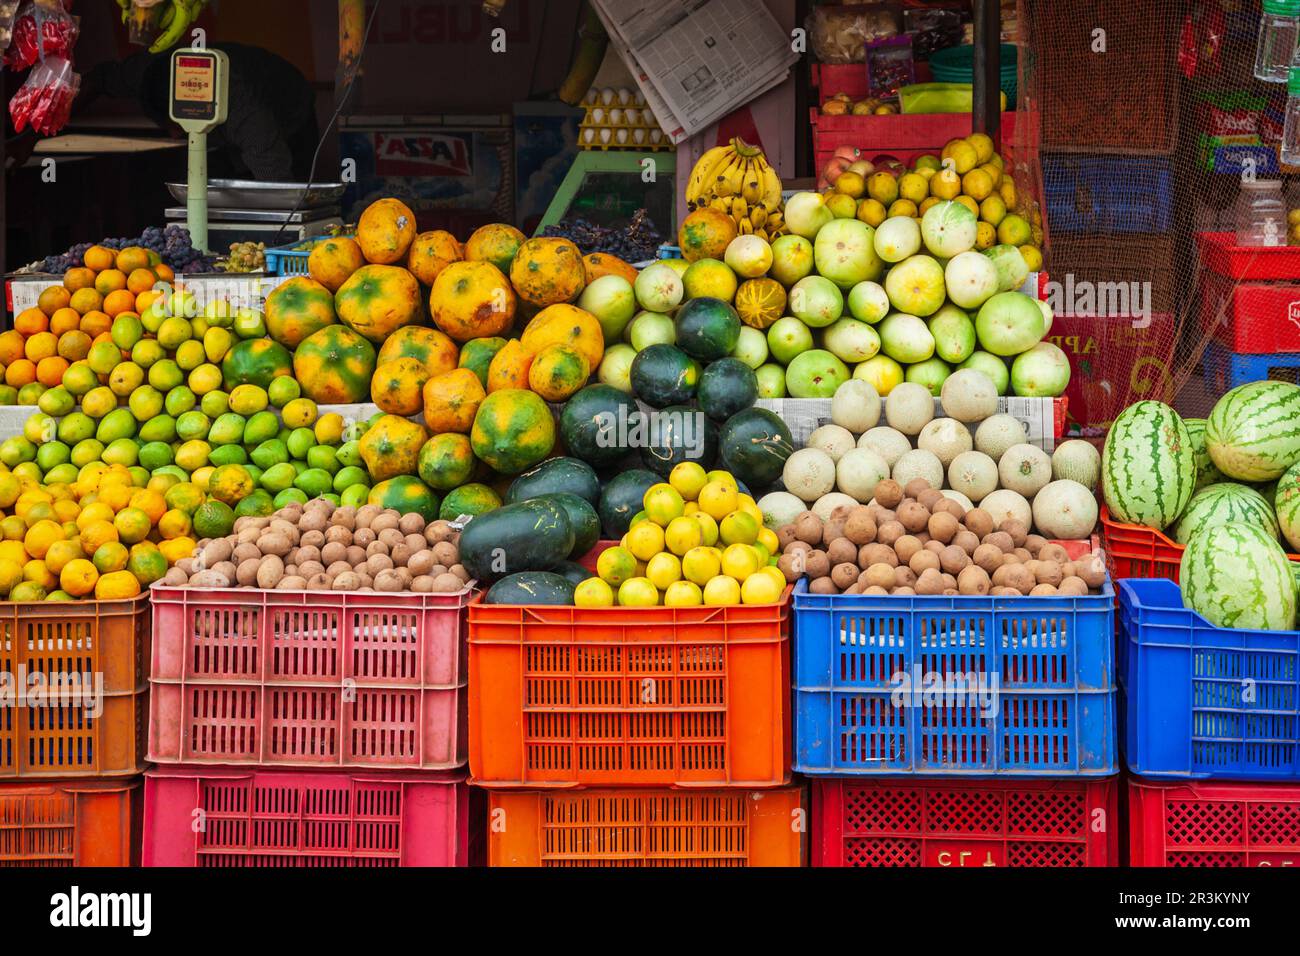 COCHIN, INDIA - MARCH 14, 2012: Fruts and vegetables at the local market in India Stock Photo